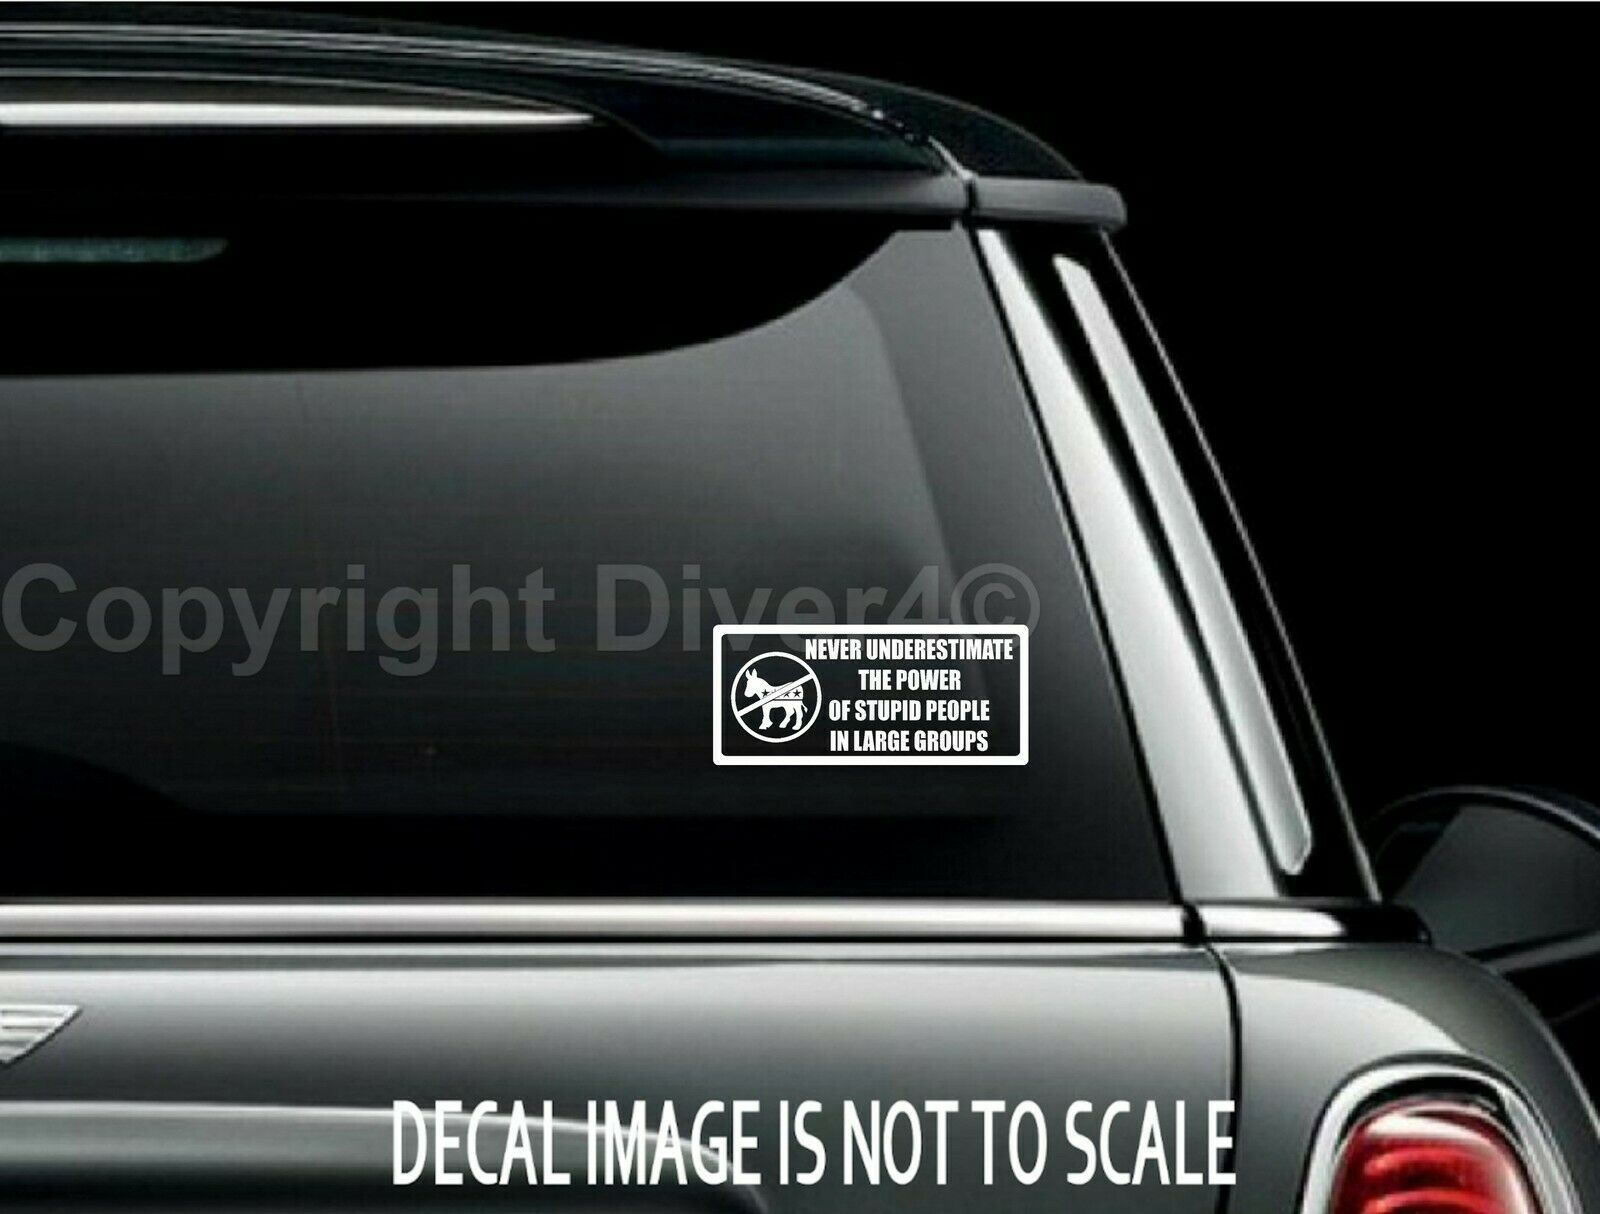 Democrats Never Underestimate the Power of Stupid People Window Decal US Sellr - $6.72 - $9.20